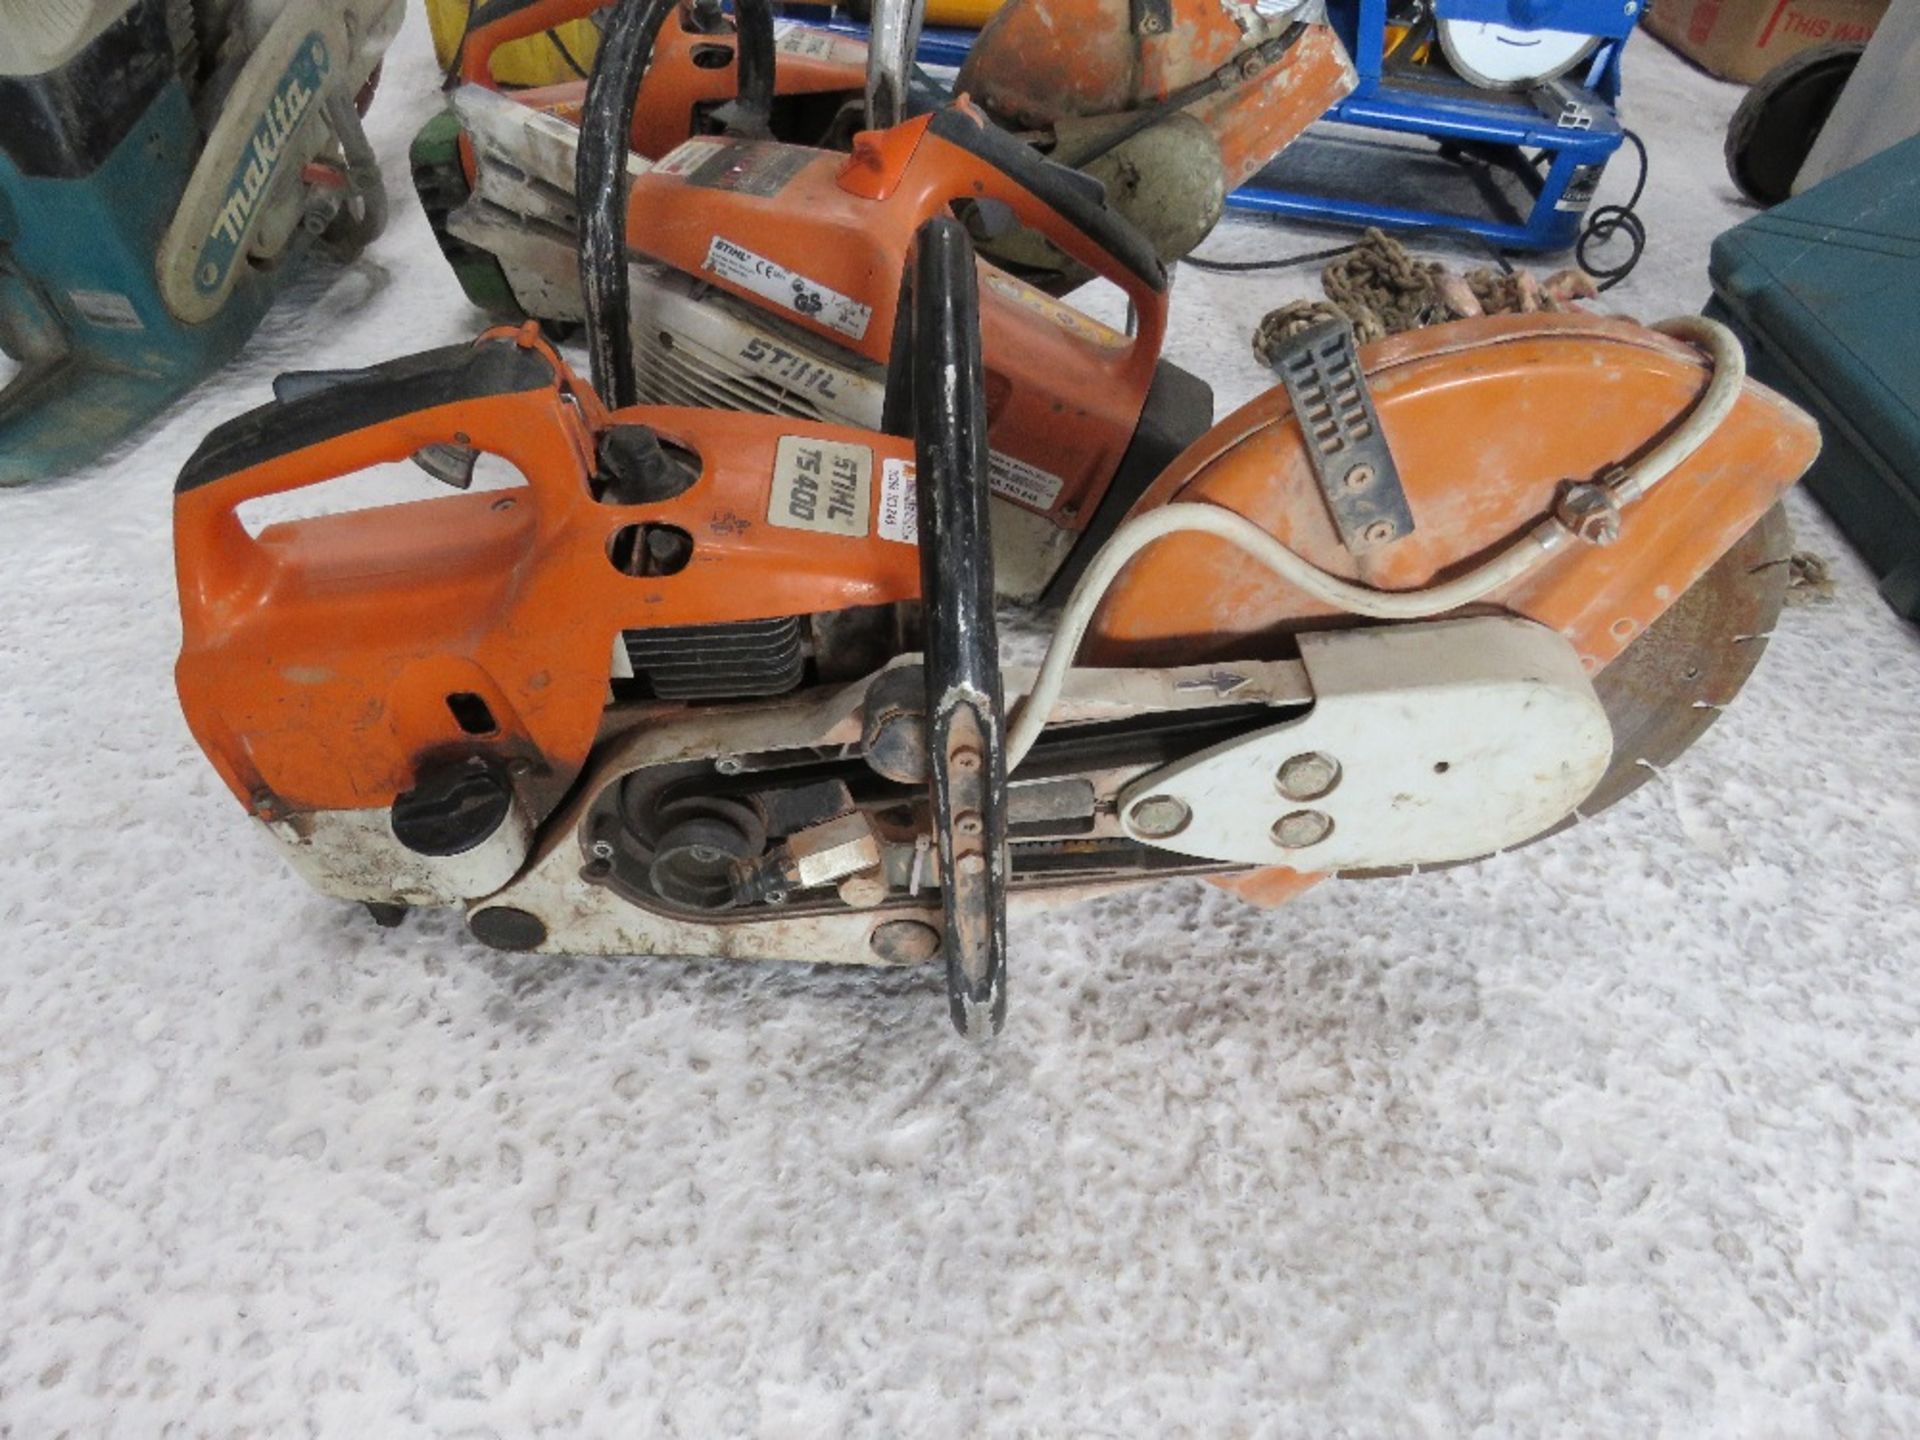 3 X STIHL TS400 PETROL SAWS FOR SPARES OR REPAIR.....THIS LOT IS SOLD UNDER THE AUCTIONEERS MARGIN S - Image 6 of 6